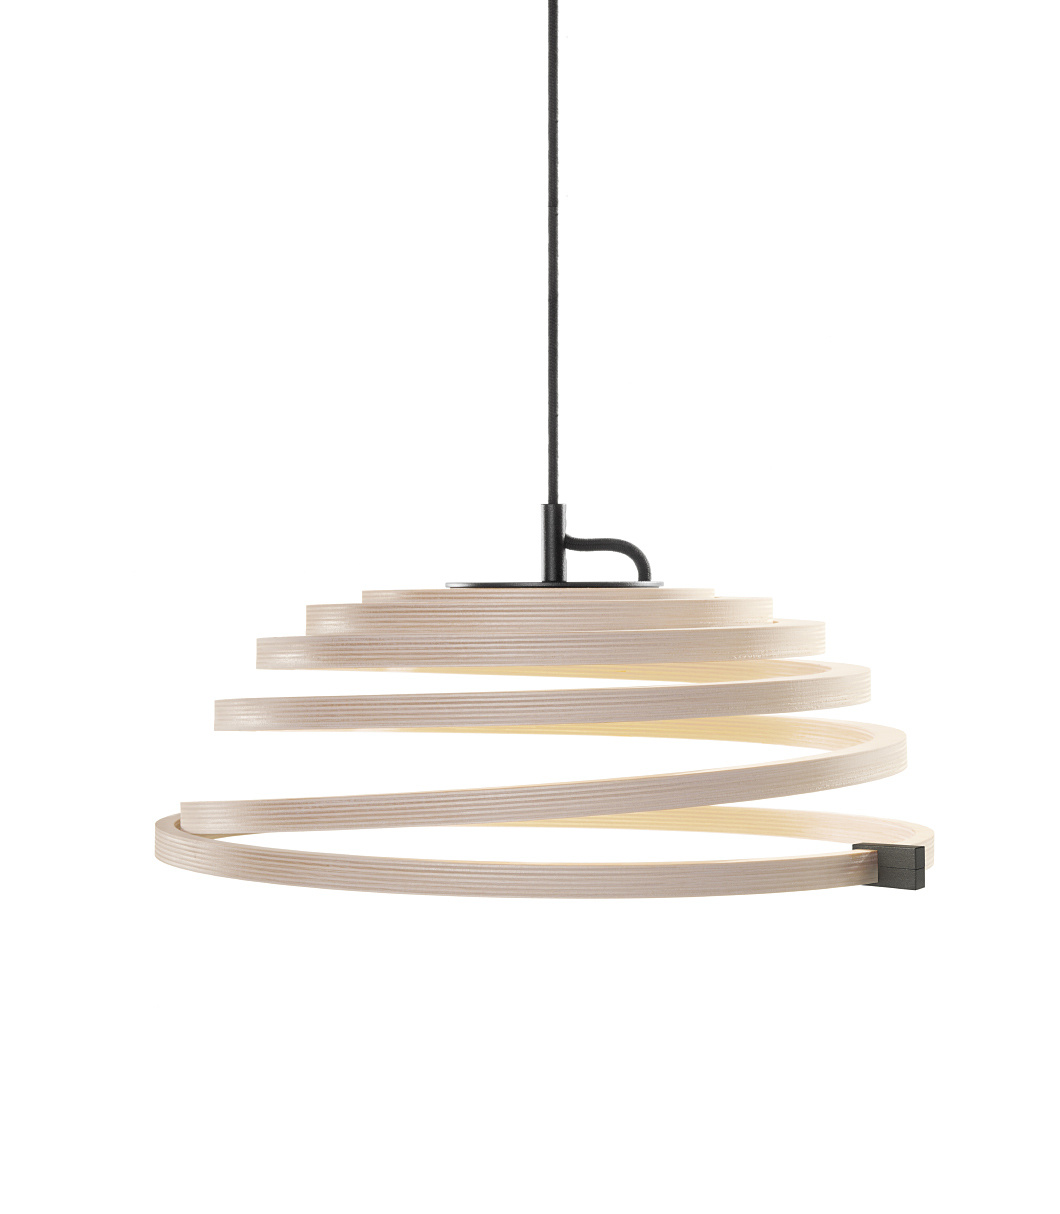 Aspiro 8000 pendant lamp is available in black laminated